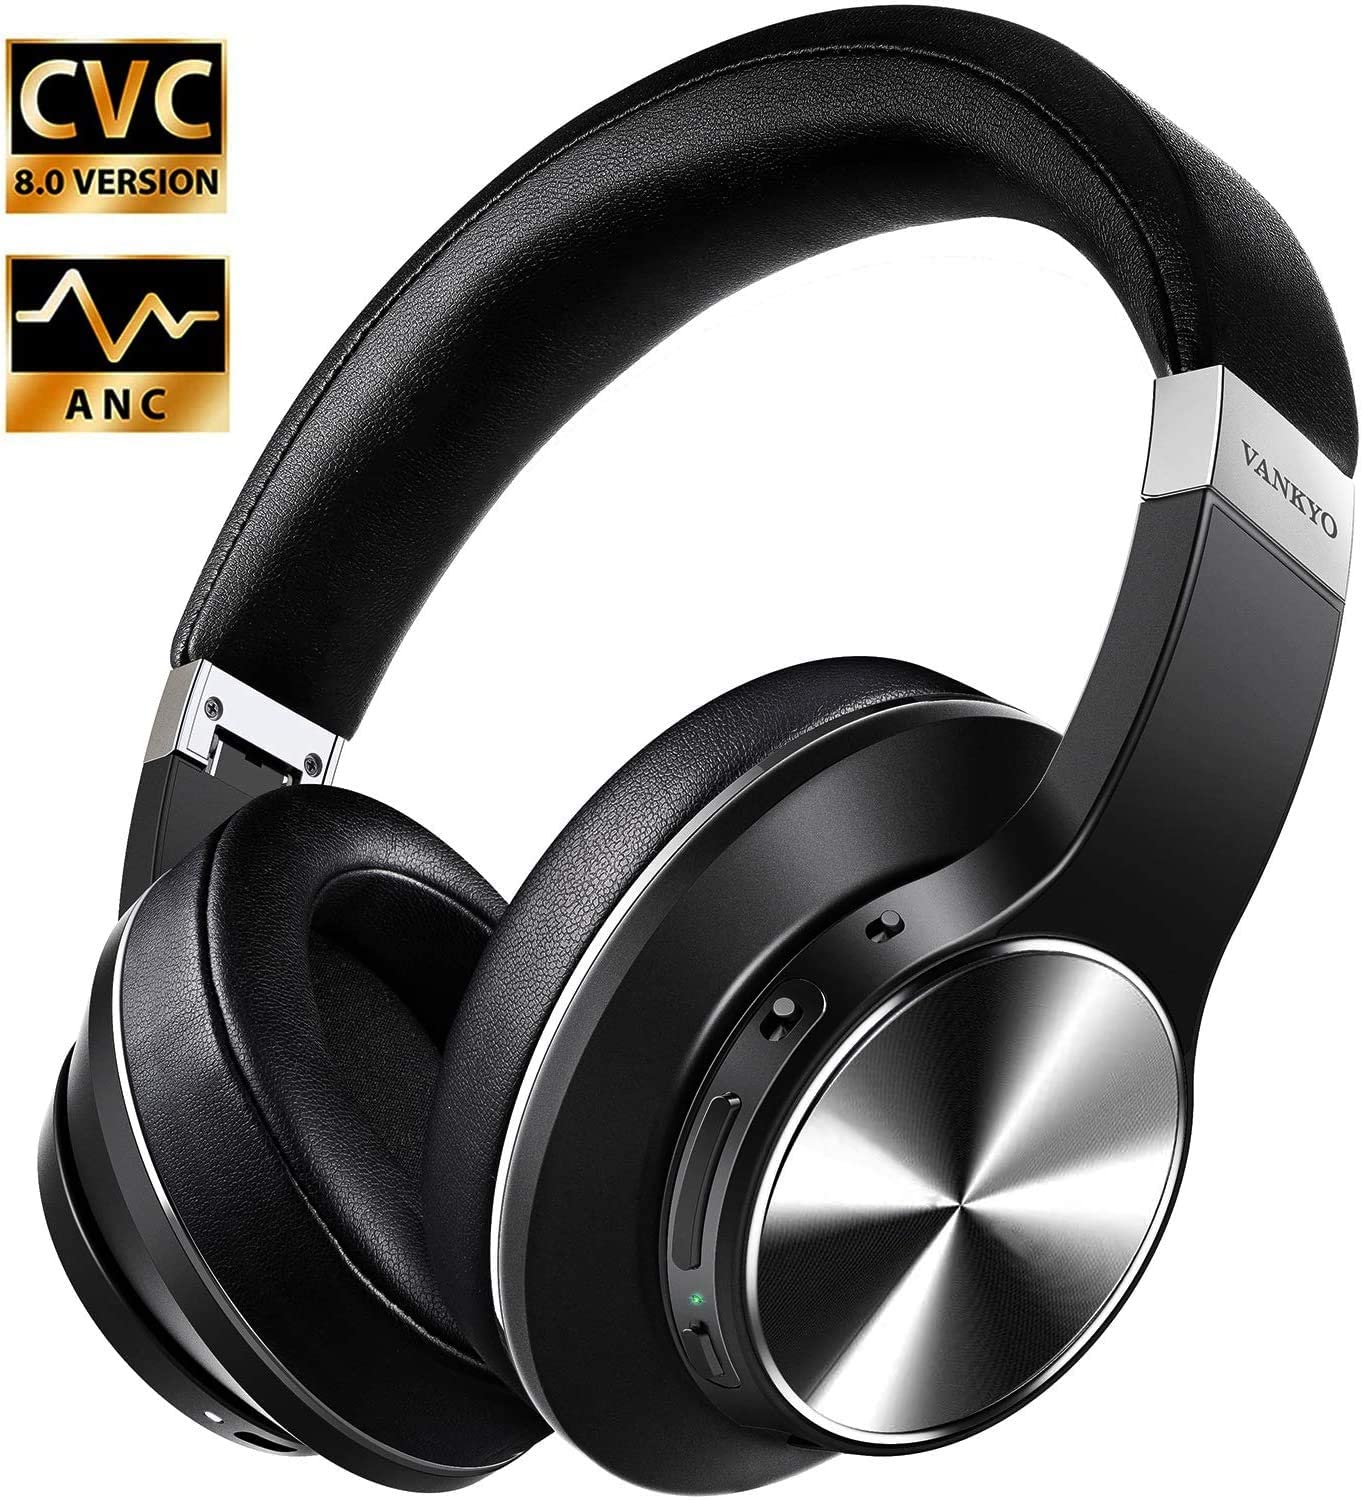 VANKYO C751 Wireless Headphones with CVC 8.0 Microphone, Deep Bass, High Fidelity Sound, Comfortable Protein Ear Cushions, 30 Hours of Play Time, Suitable for Travel/Work - image 1 of 8